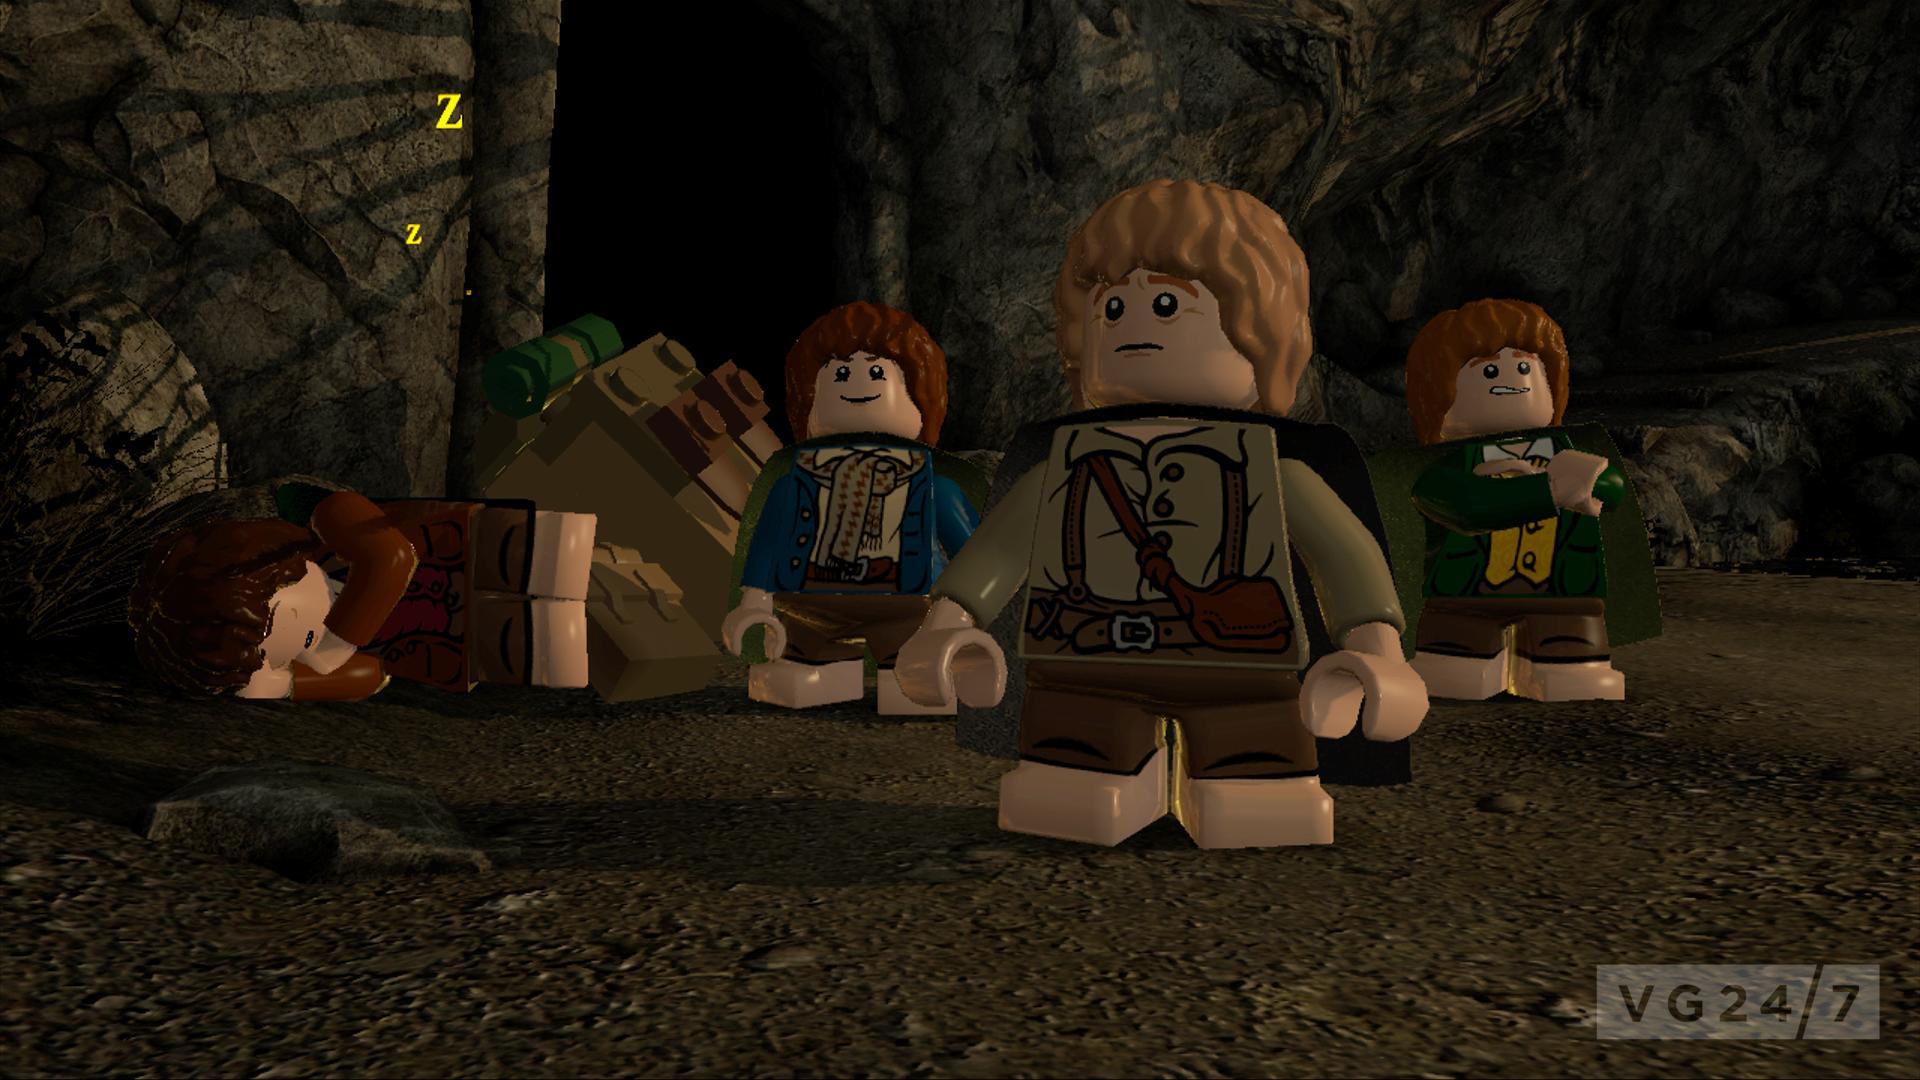 http://gam3rha.persiangig.com/image/LEGO%20The%20Lord%20of%20the%20Rings/Lego-lotr-2.jpg